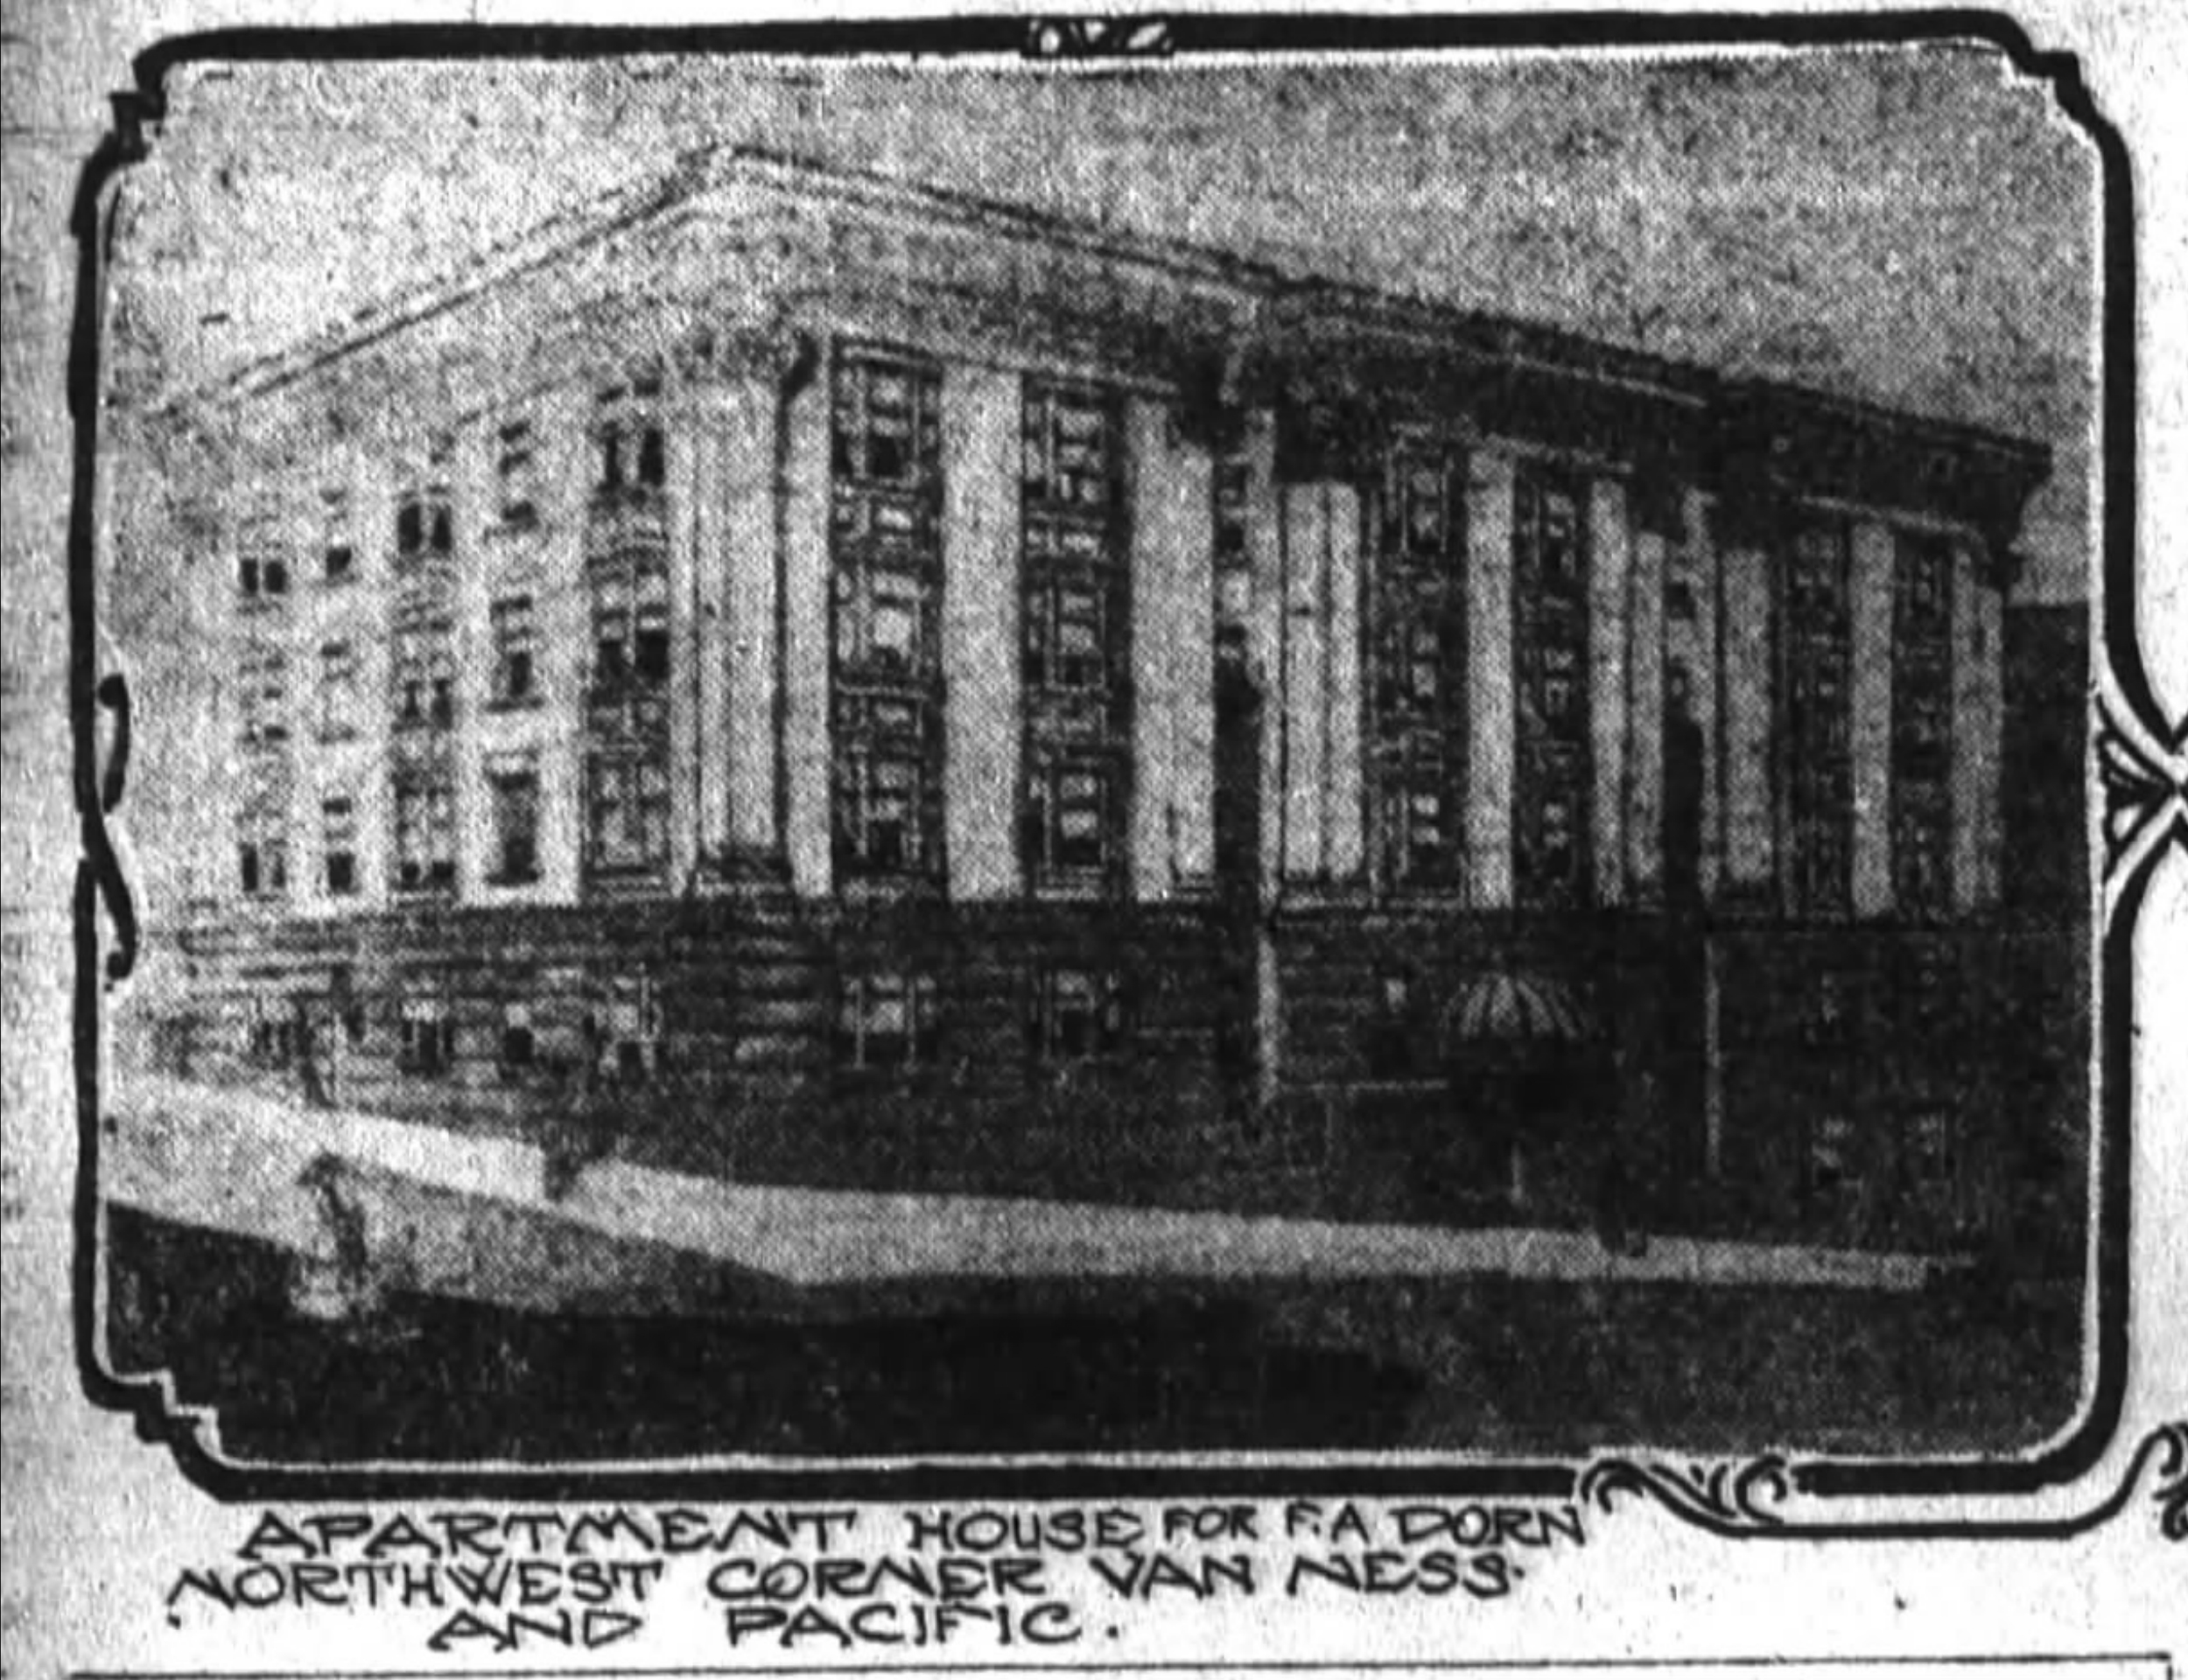 2107 Van Ness Avenue construction update circa July 23, 1910, image from the SF Chronicle via JRP